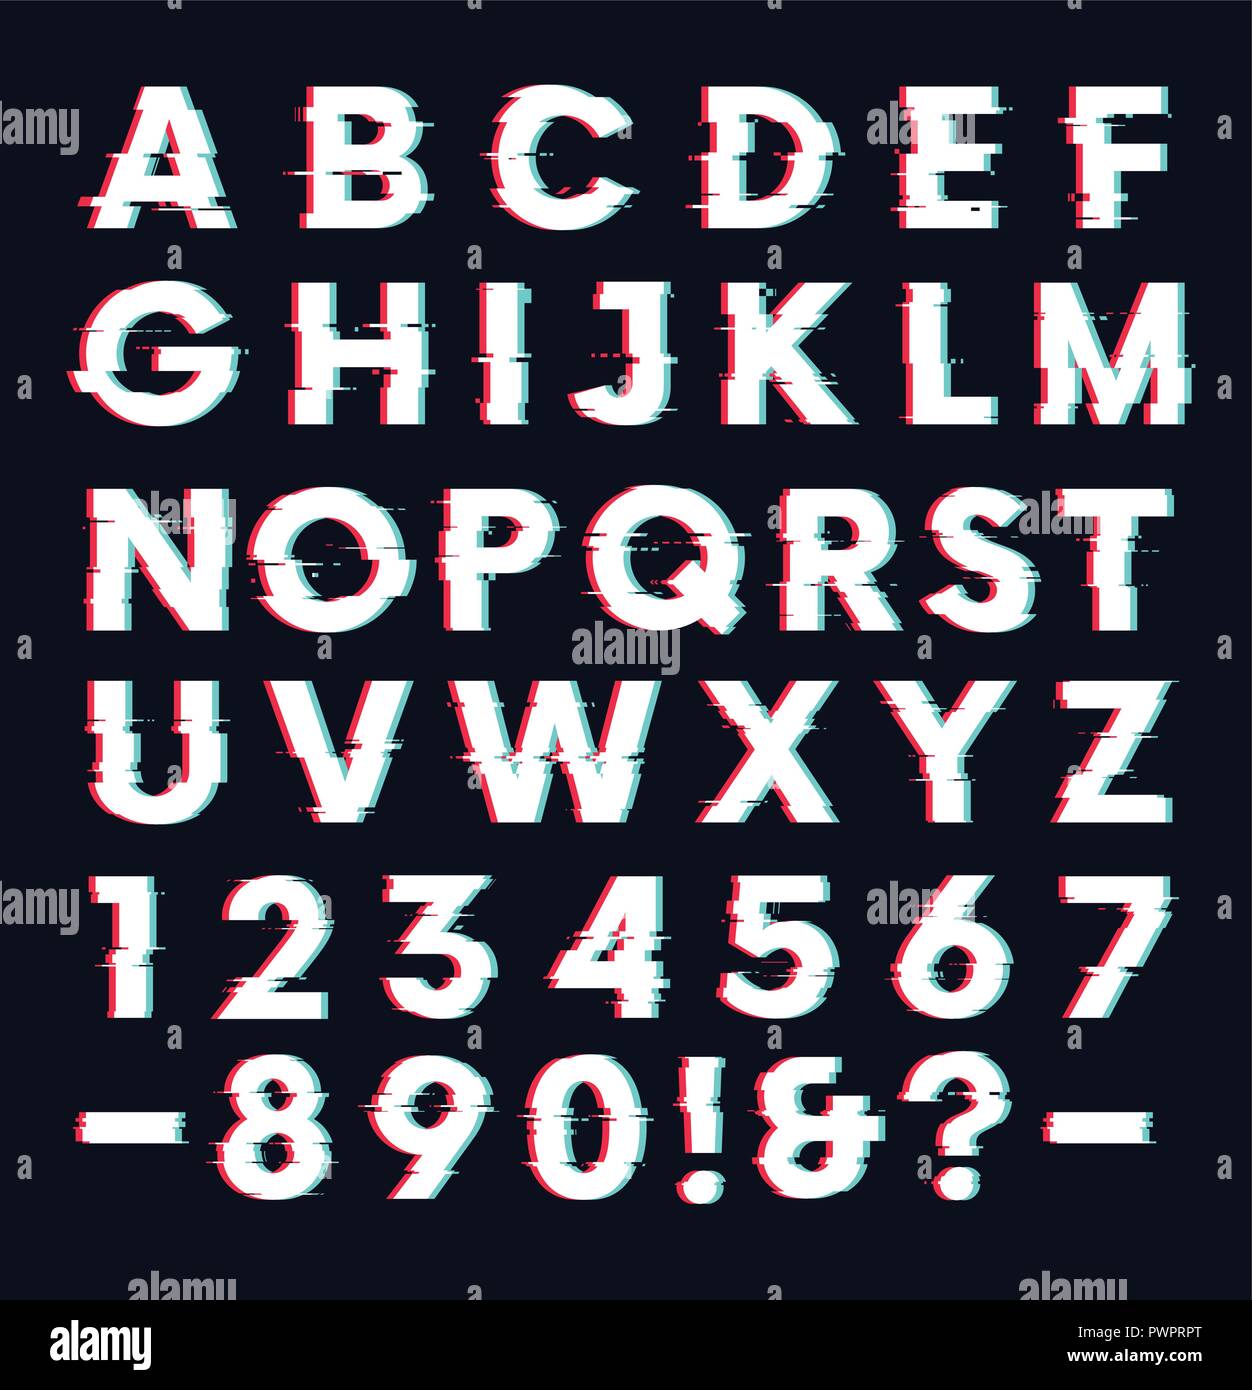 https://c8.alamy.com/comp/PWPRPT/glitch-font-with-distortion-effect-vector-letters-and-numbers-dark-background-template-for-your-design-PWPRPT.jpg